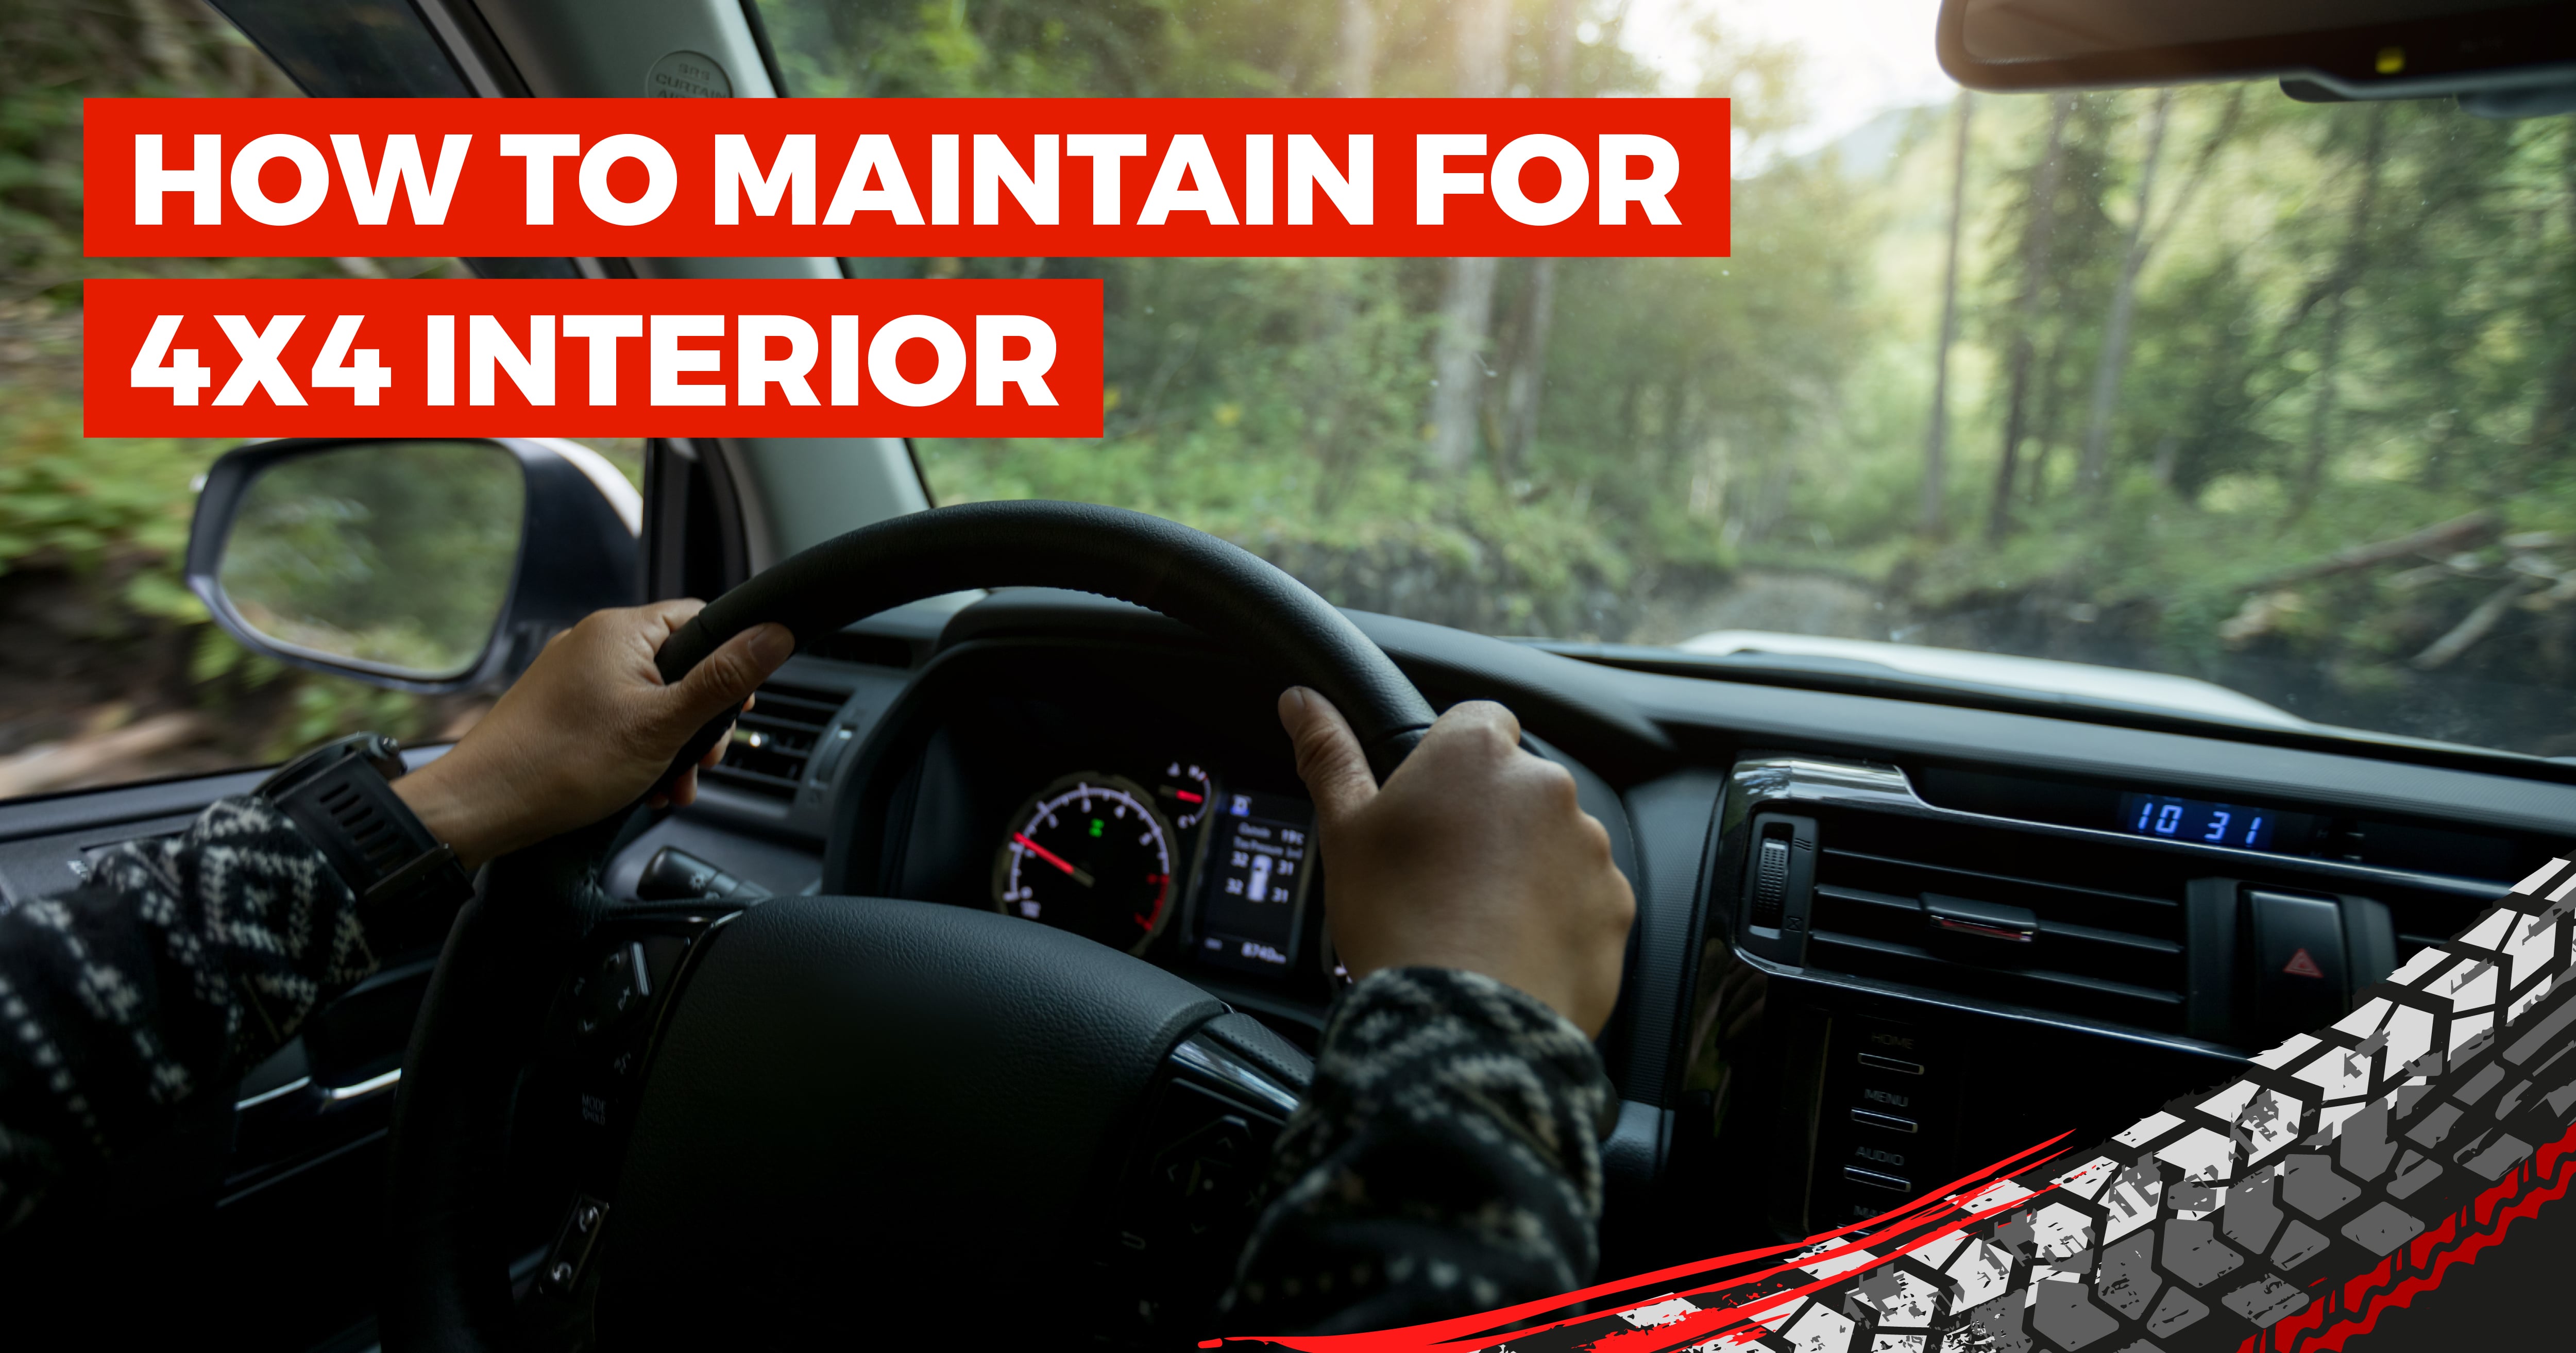 How To Maintain Your 4x4 Interior